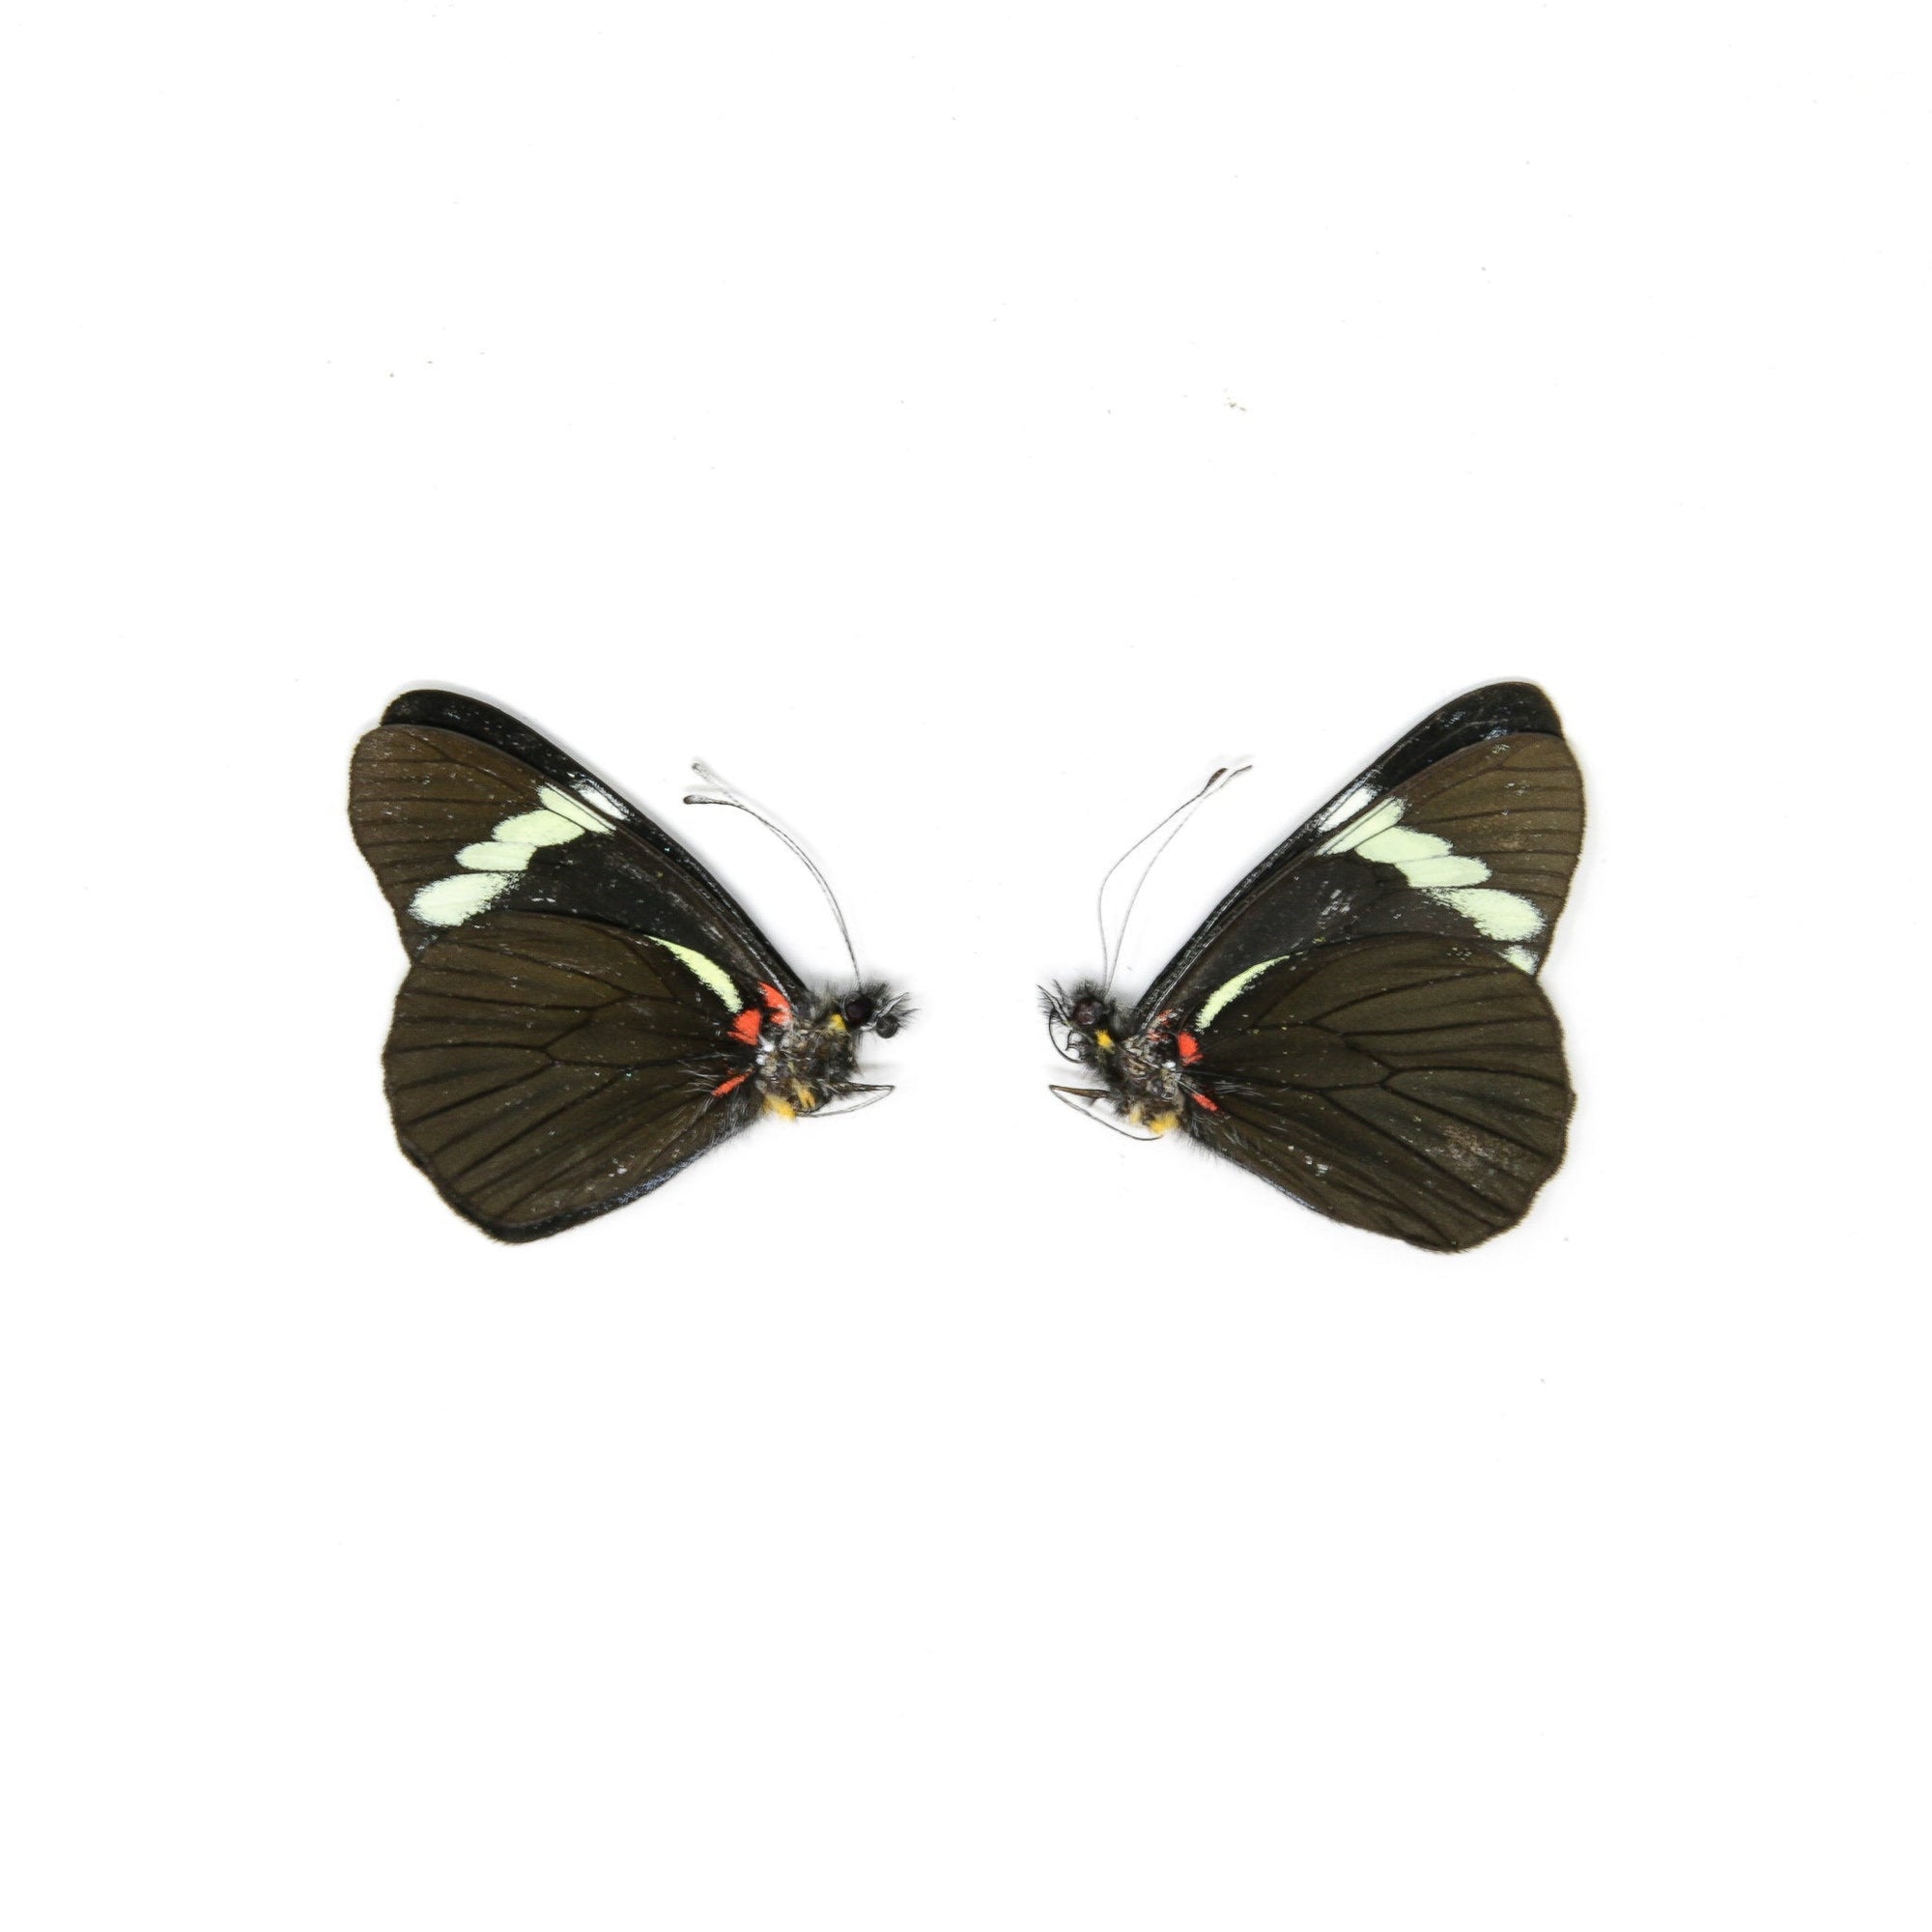 2 x Pereute telthusa | Dry-Preserved Unmounted Butterfly Specimens A1